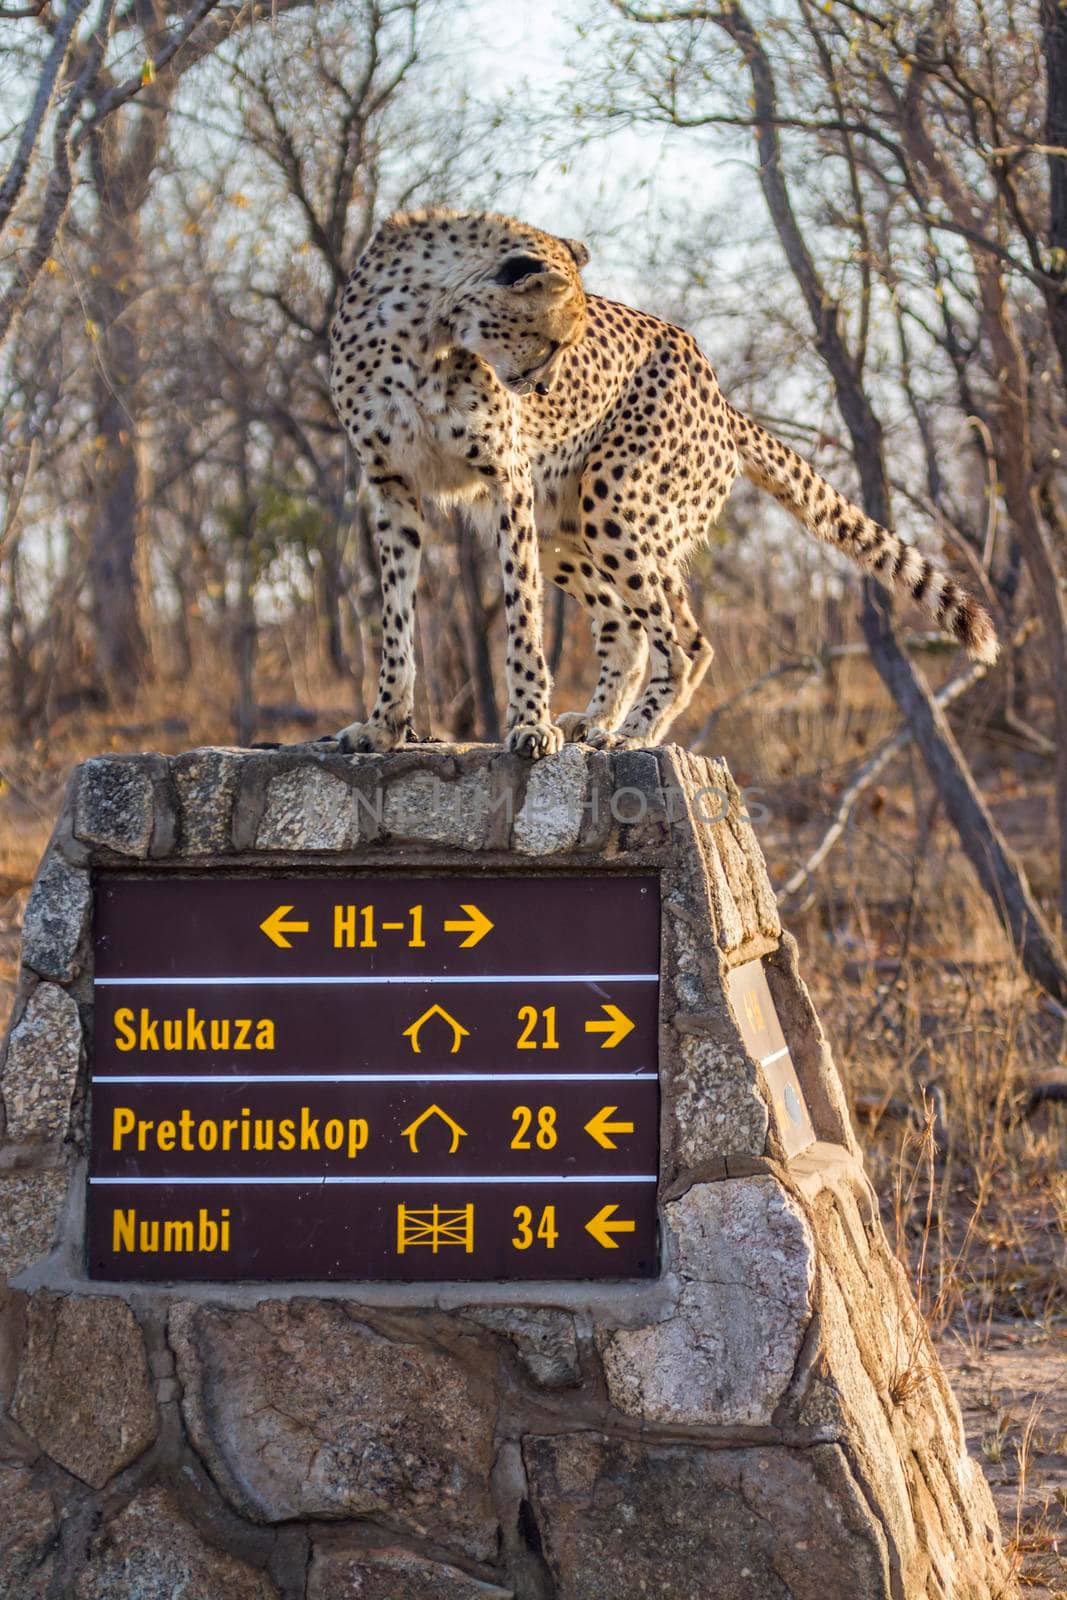 Cheetah in Kruger National park, South Africa by PACOCOMO